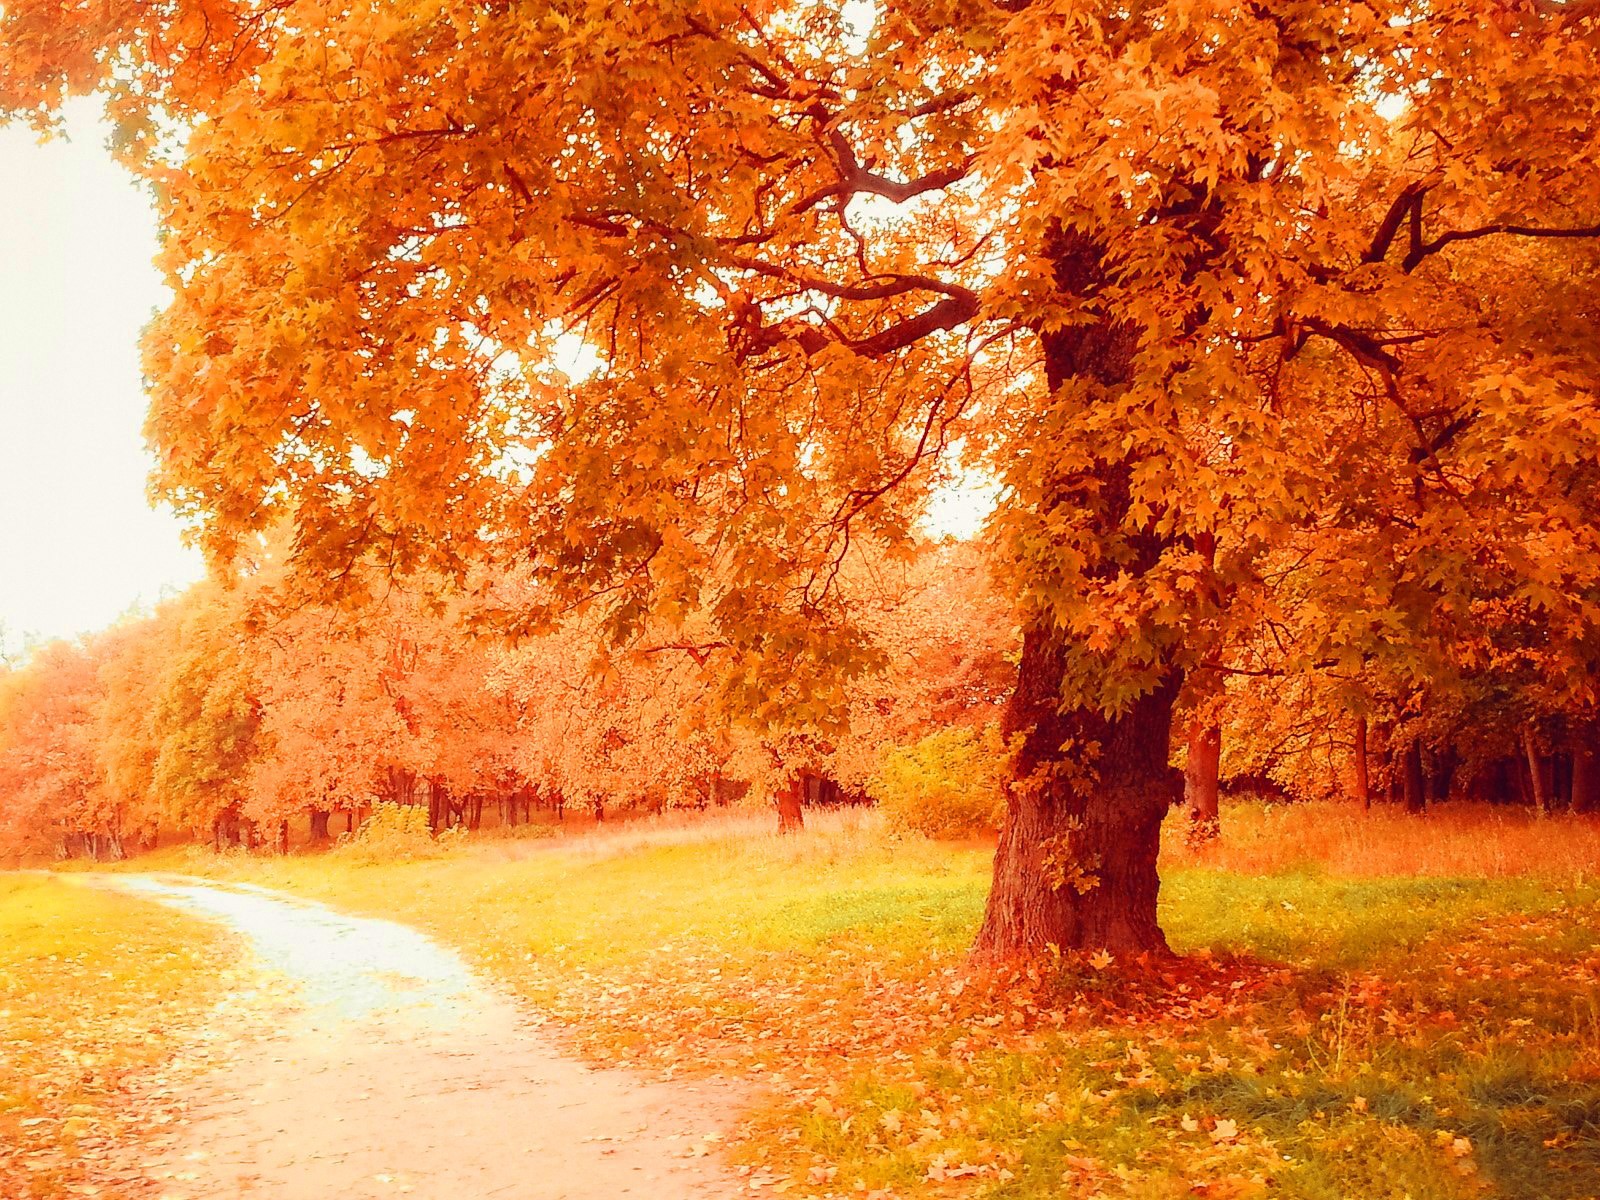 Other: Autumn Photography Nature Leaves HD Wallpapers for HD 16:9 ...